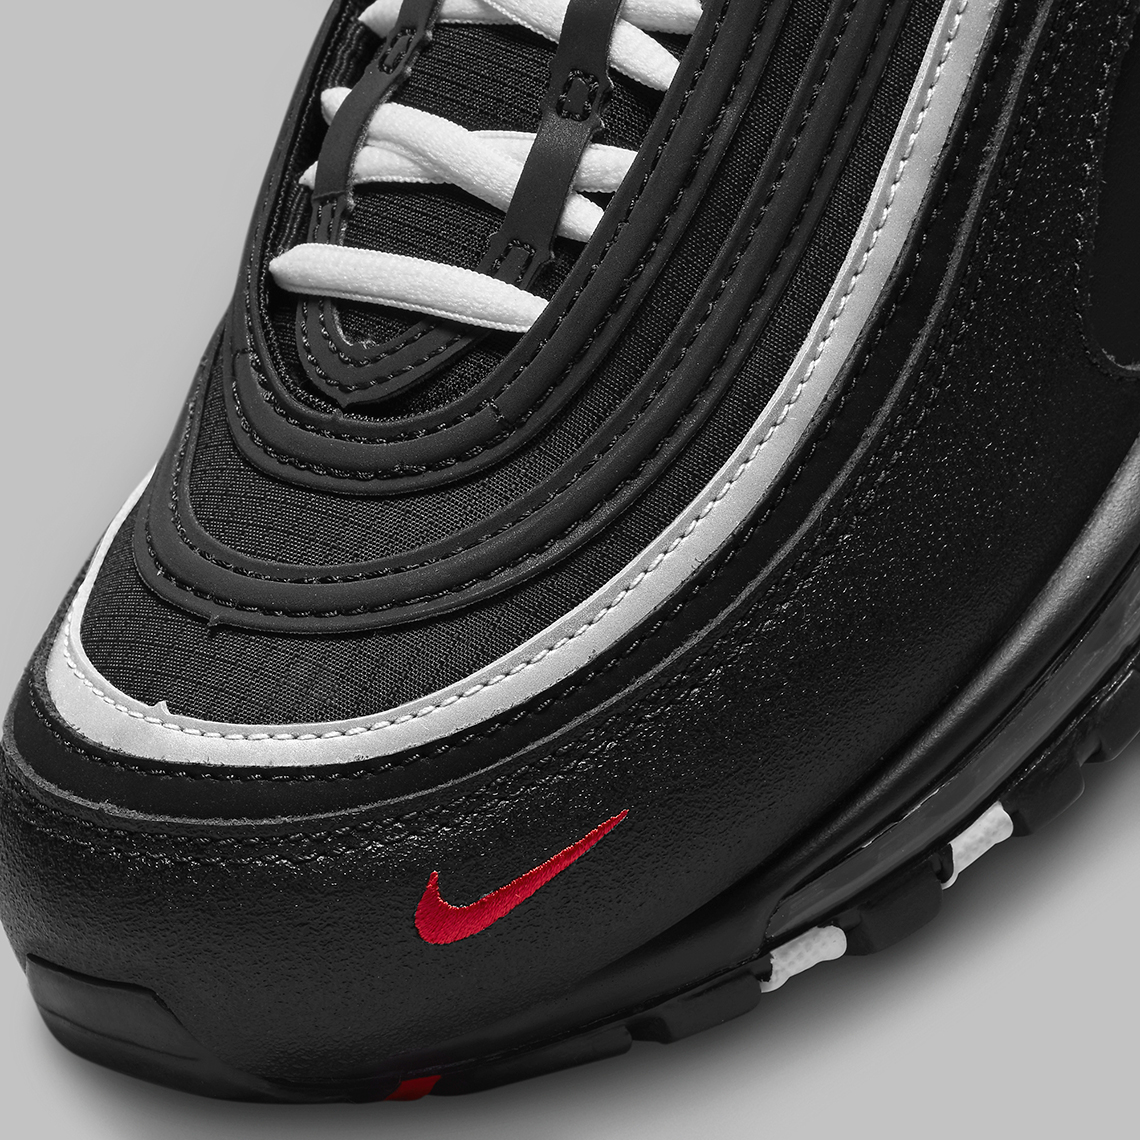 black red and white air max 97